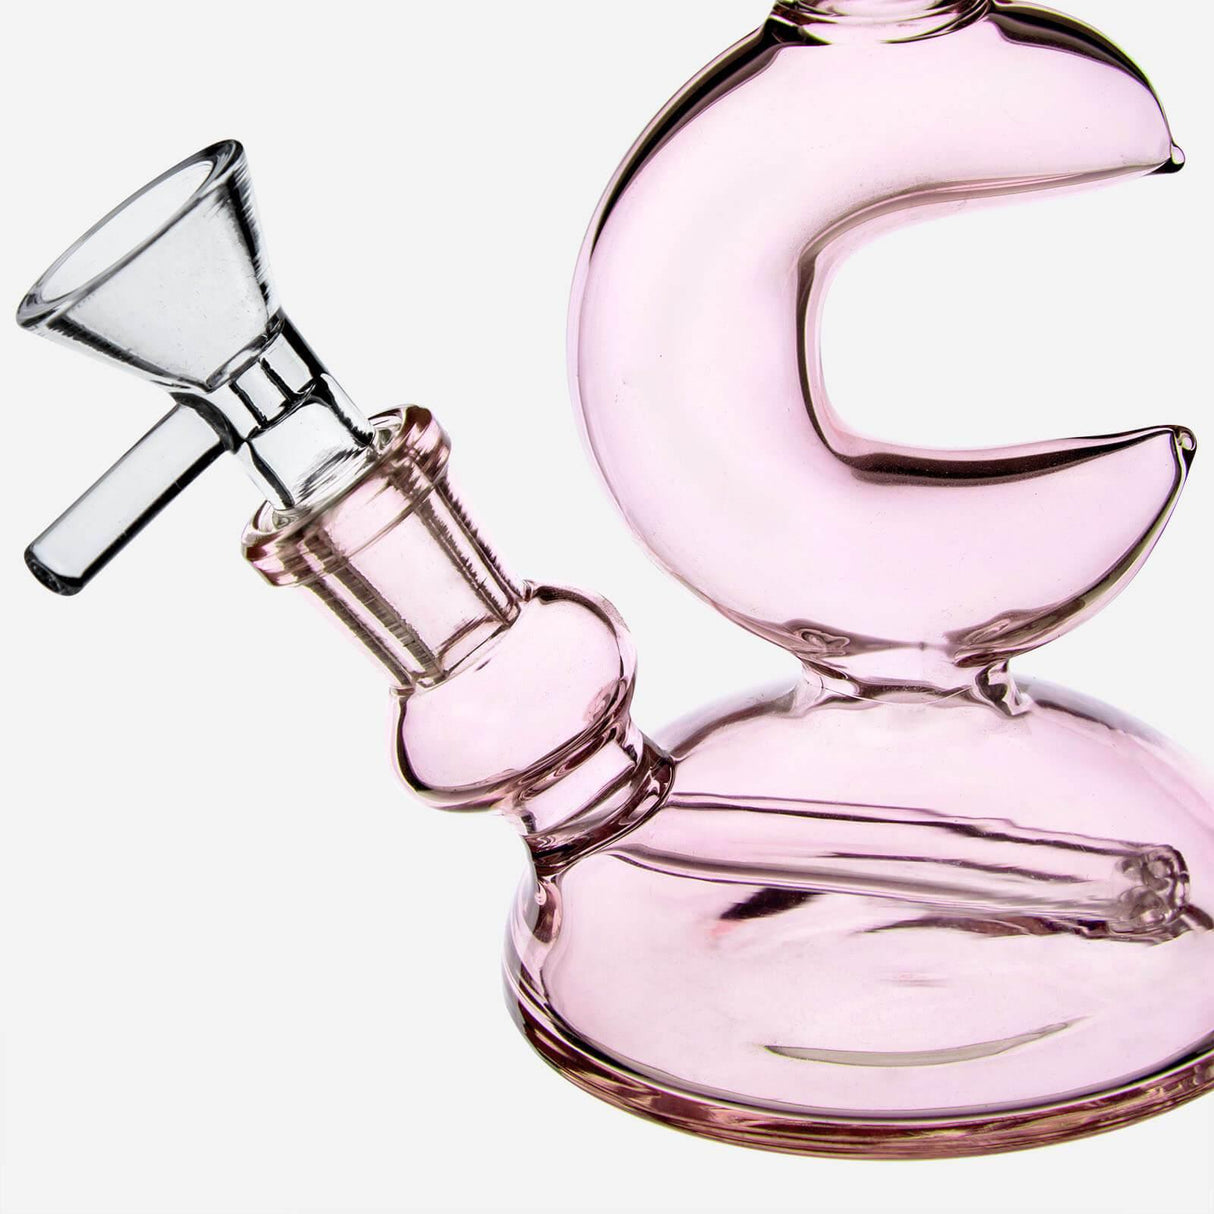 PILOTDIARY Pink Moon Dab Rig close-up side view showcasing its elegant curves and deep bowl